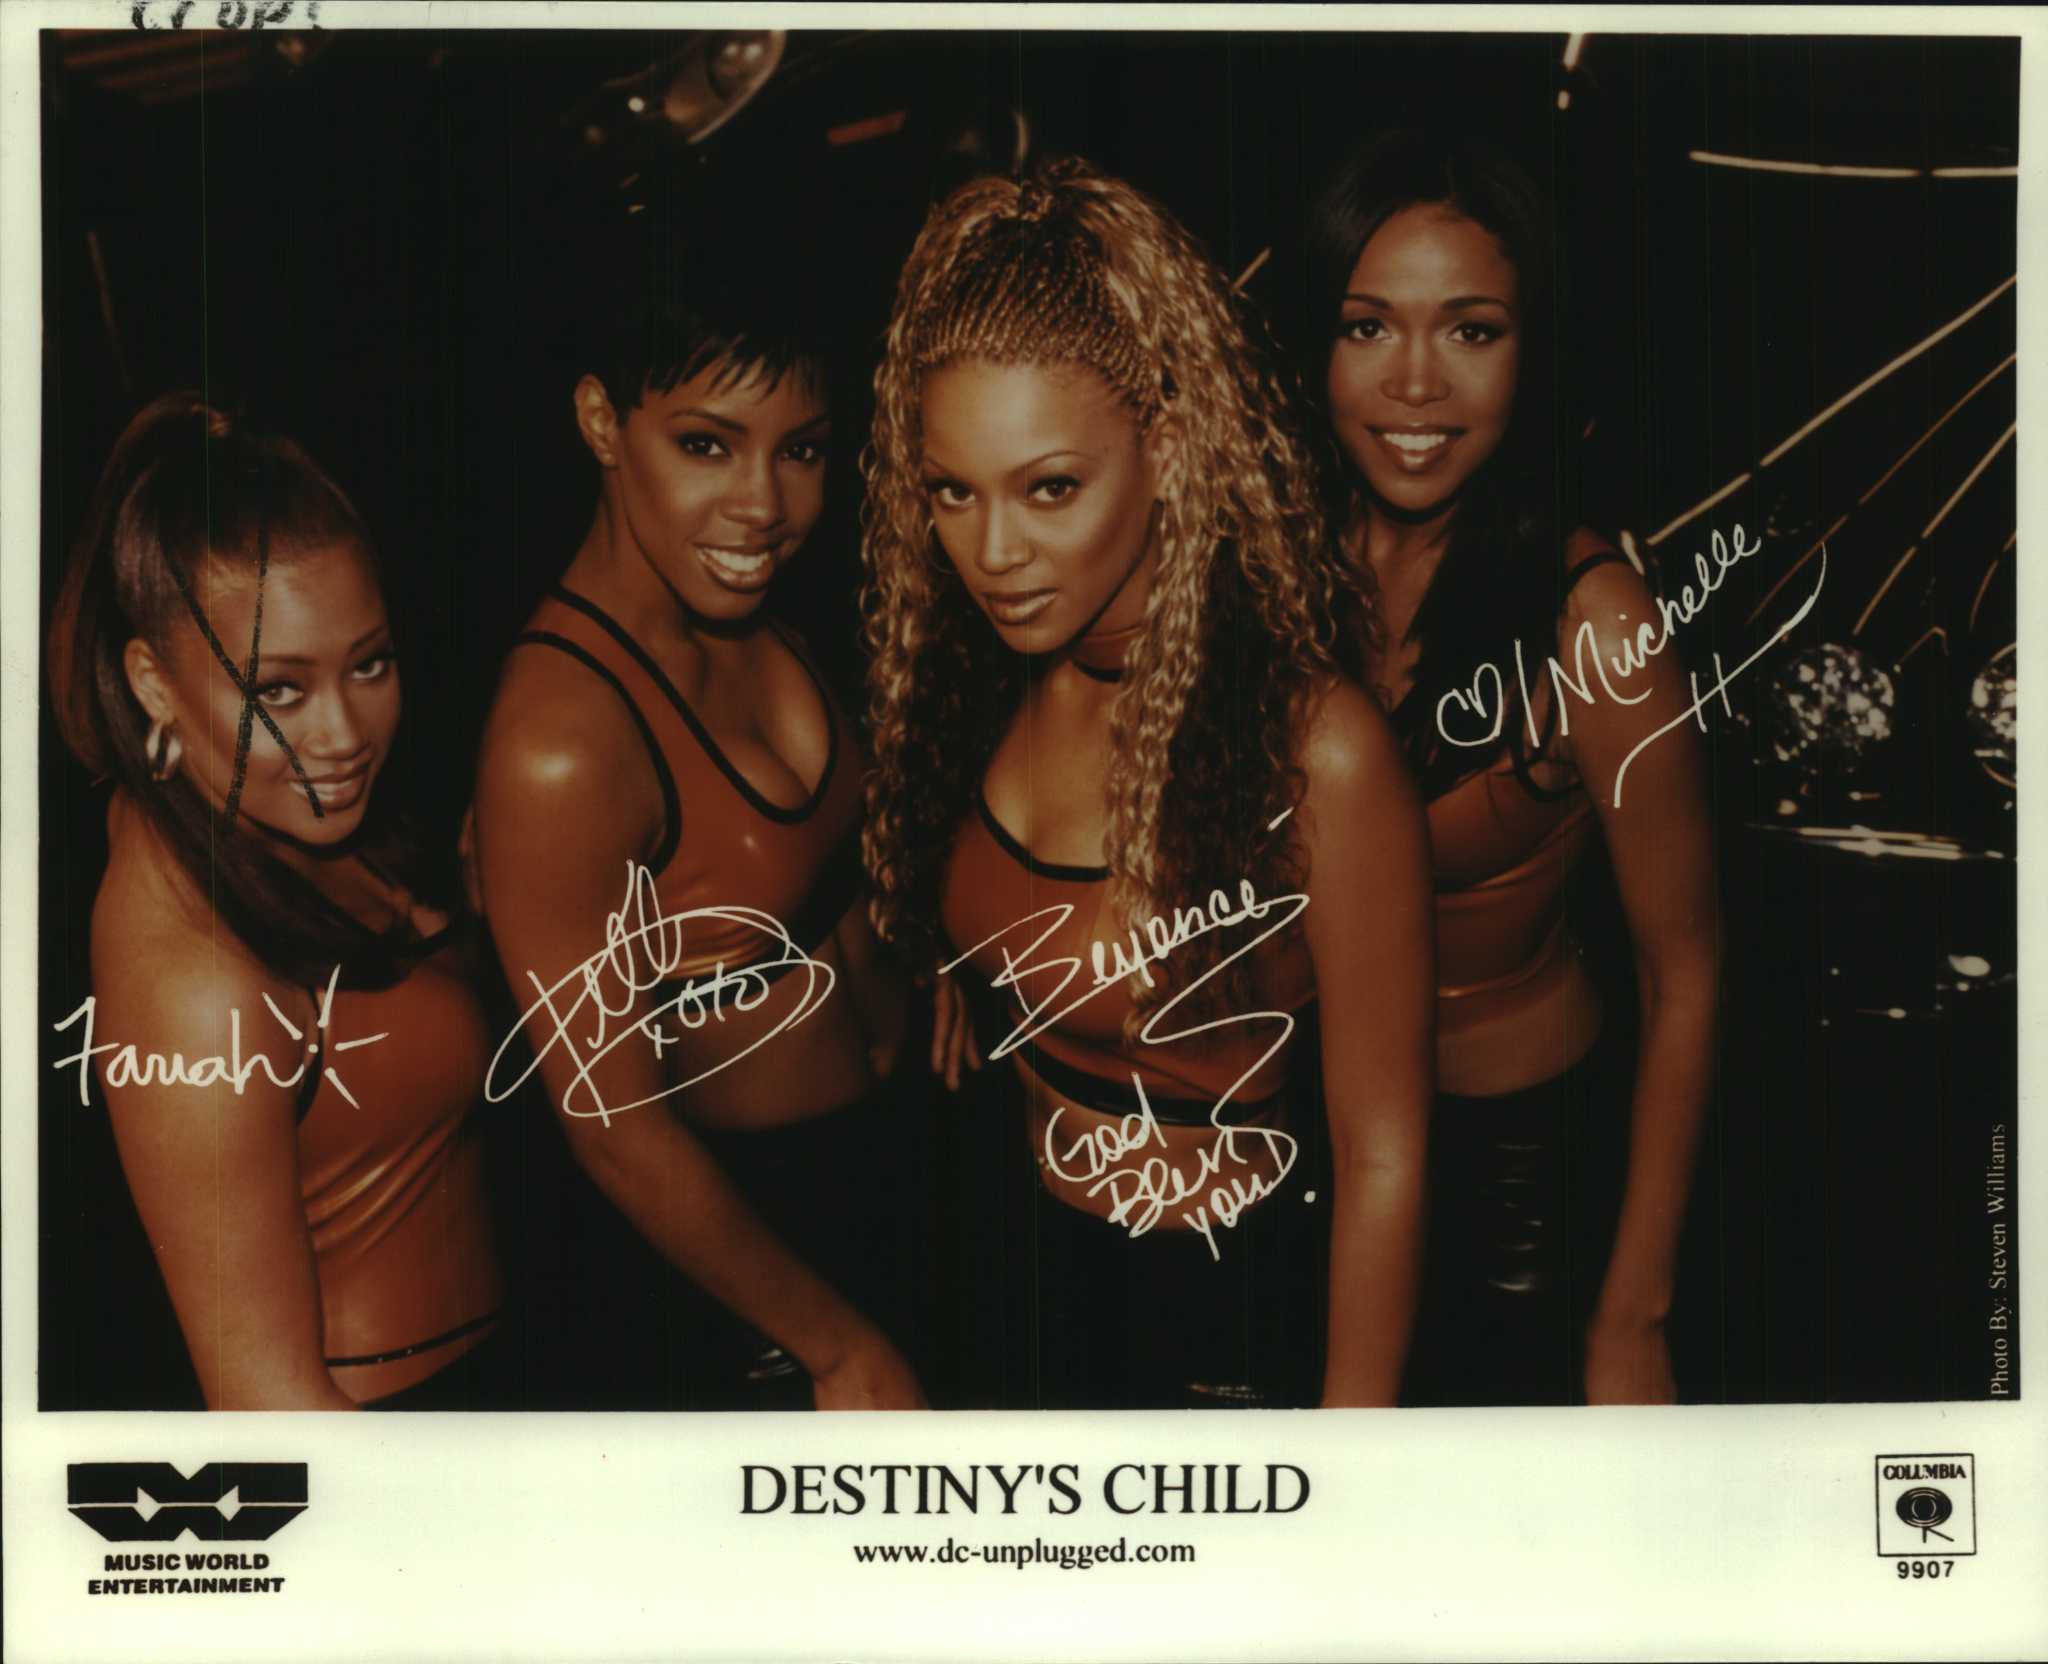 Destiny's Child album 'The Writing's on the Wall' is still a 